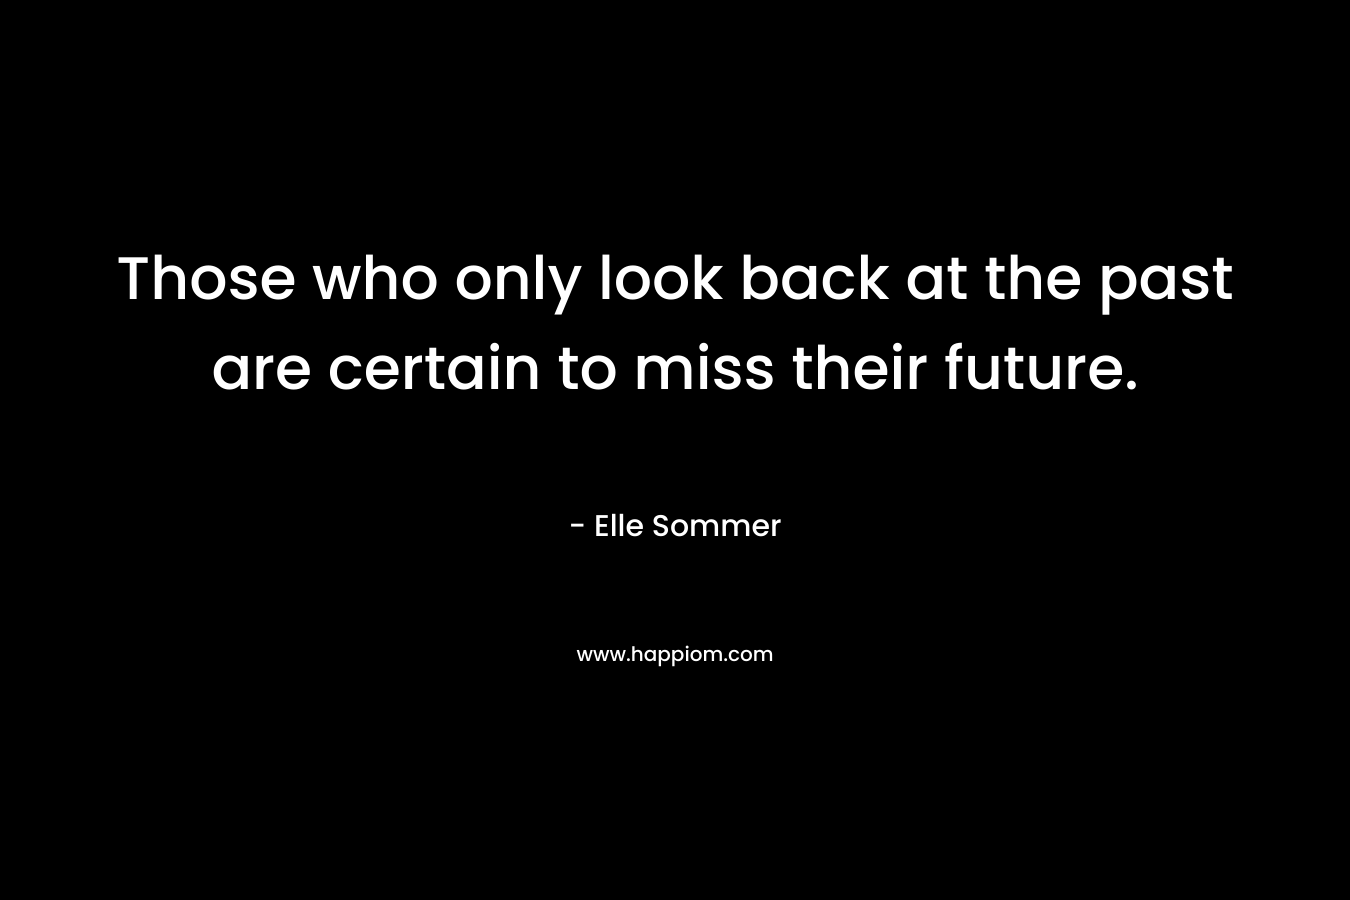 Those who only look back at the past are certain to miss their future.